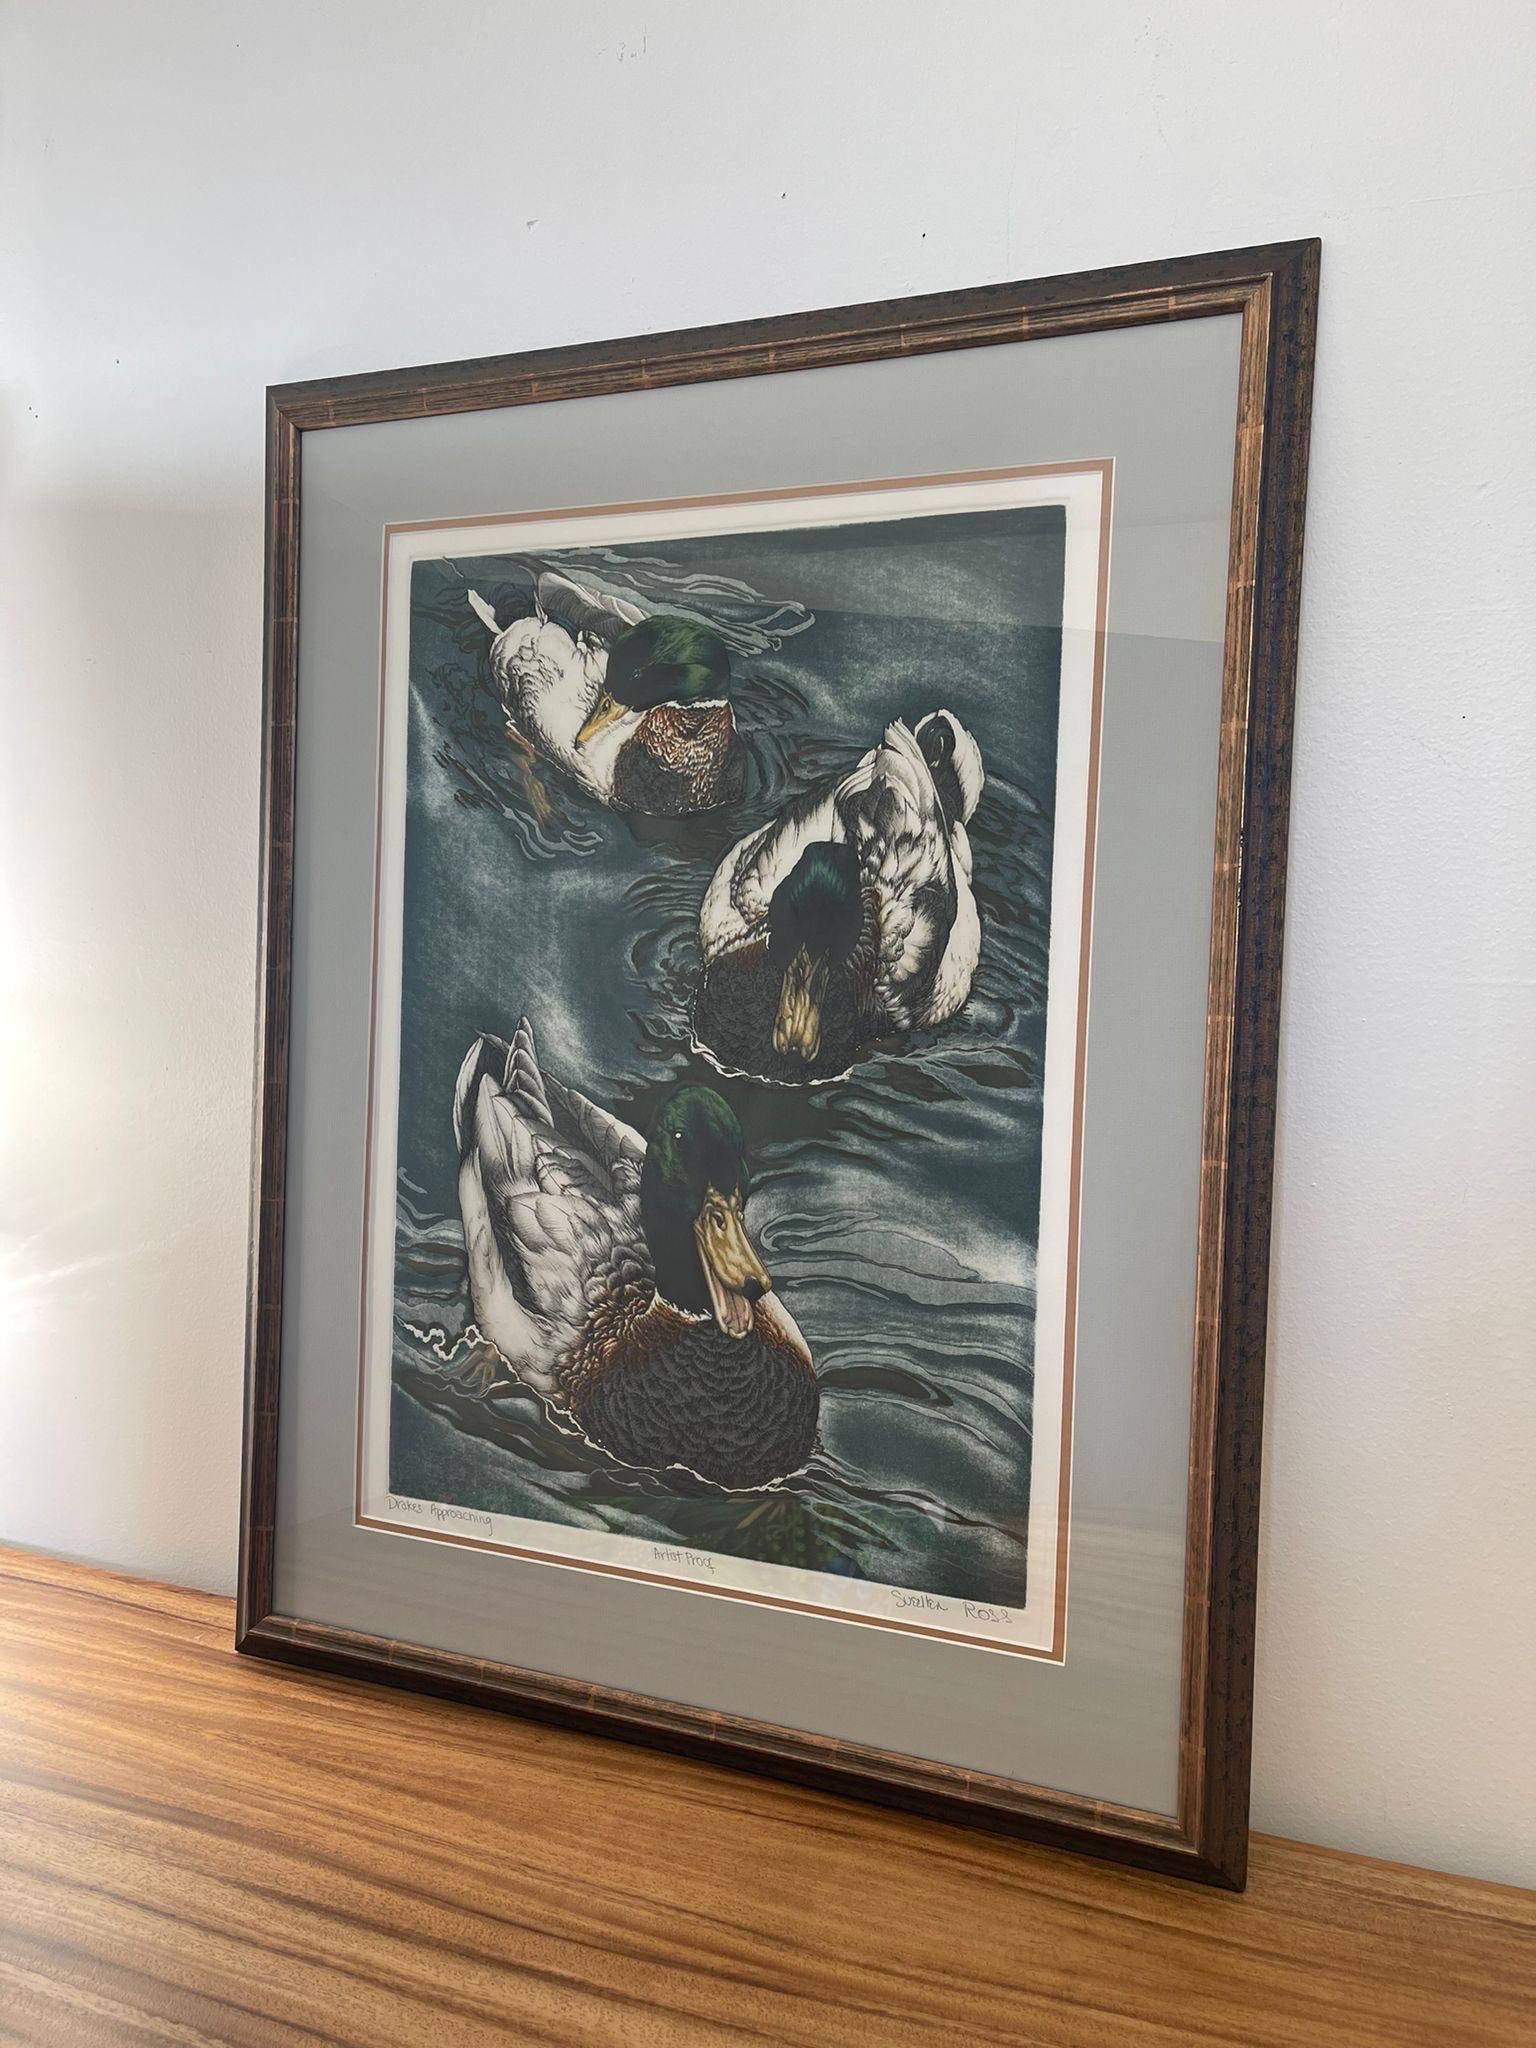 This Art print is an Artist proof, which is notably made under direct supervision of the Artist and approved before numbered prints were made. This Piece of Art features mallards swimming through water. Professionally framed and matted. Vintage